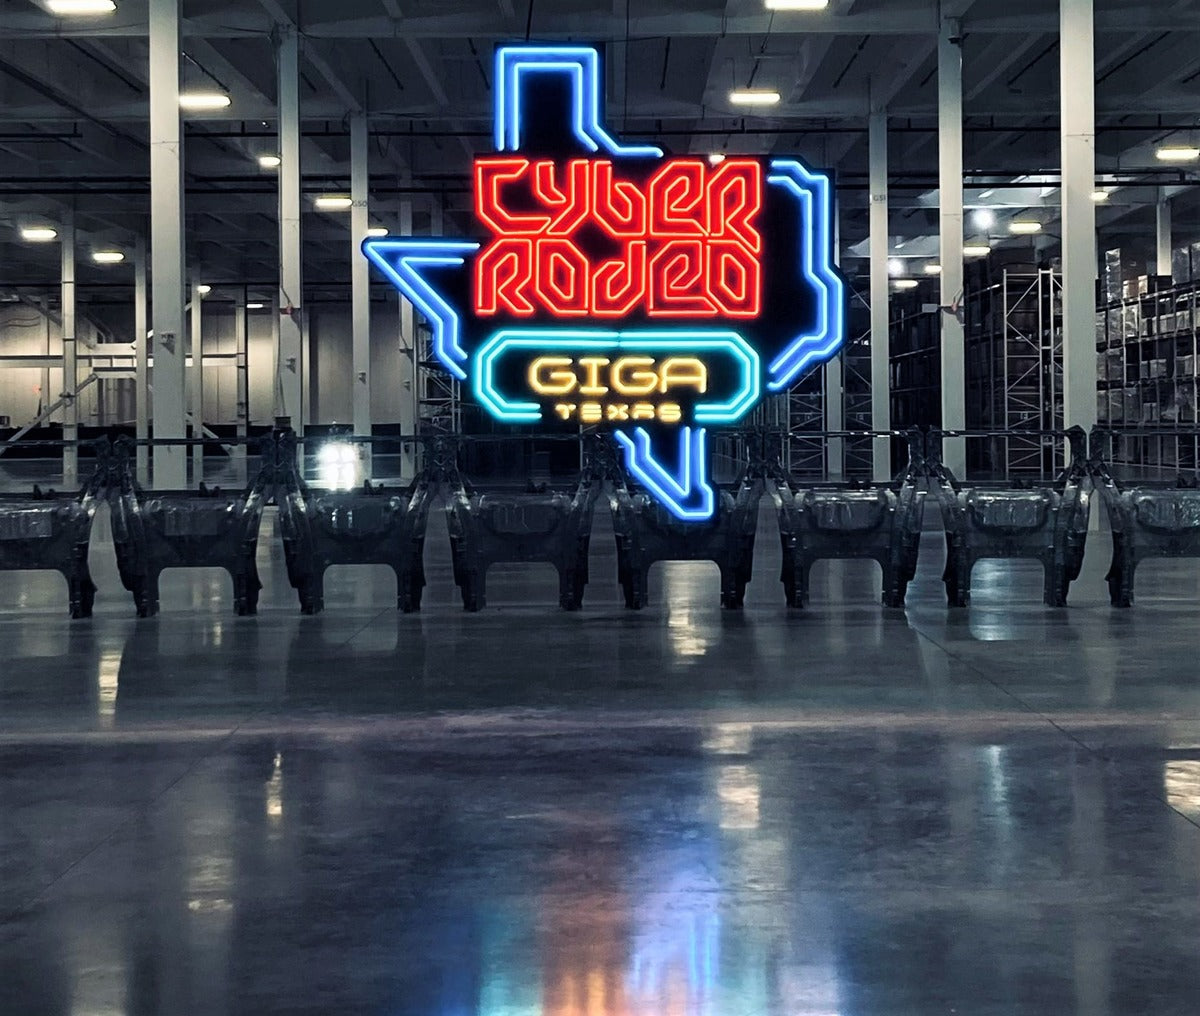 Tesla Giga Texas Cyber Rodeo to Be Live-Streamed, Event Entry 'won't be super strict', Says Elon Musk